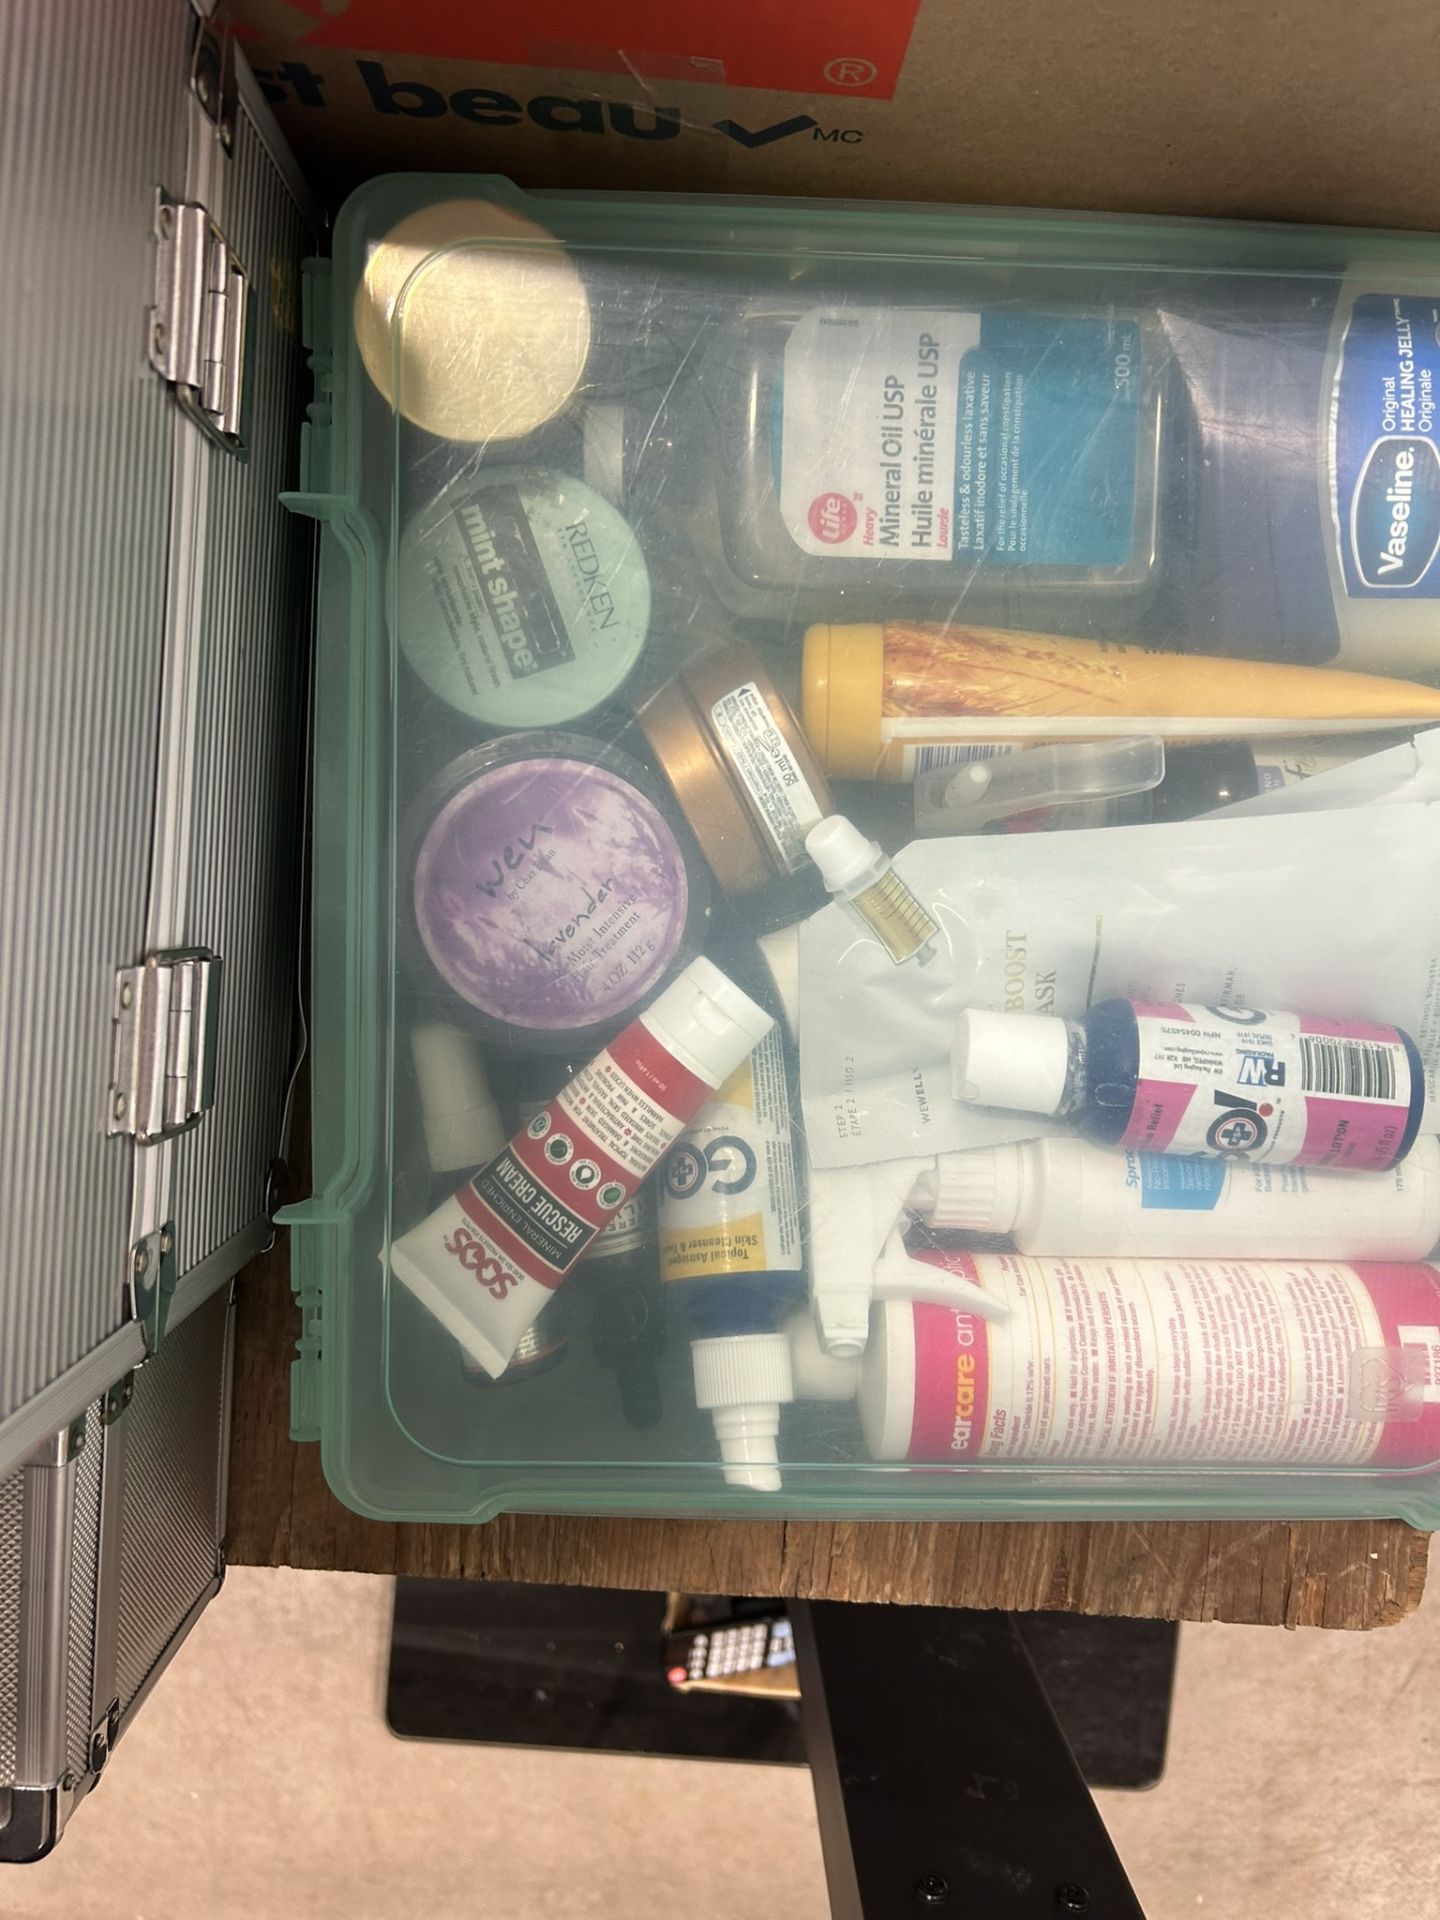 L/O ASSORTED BATHROOM ITEMS, CURLING IRONS, HAIR DRYER, PERSONAL GROOMING, ETC. - Image 15 of 24